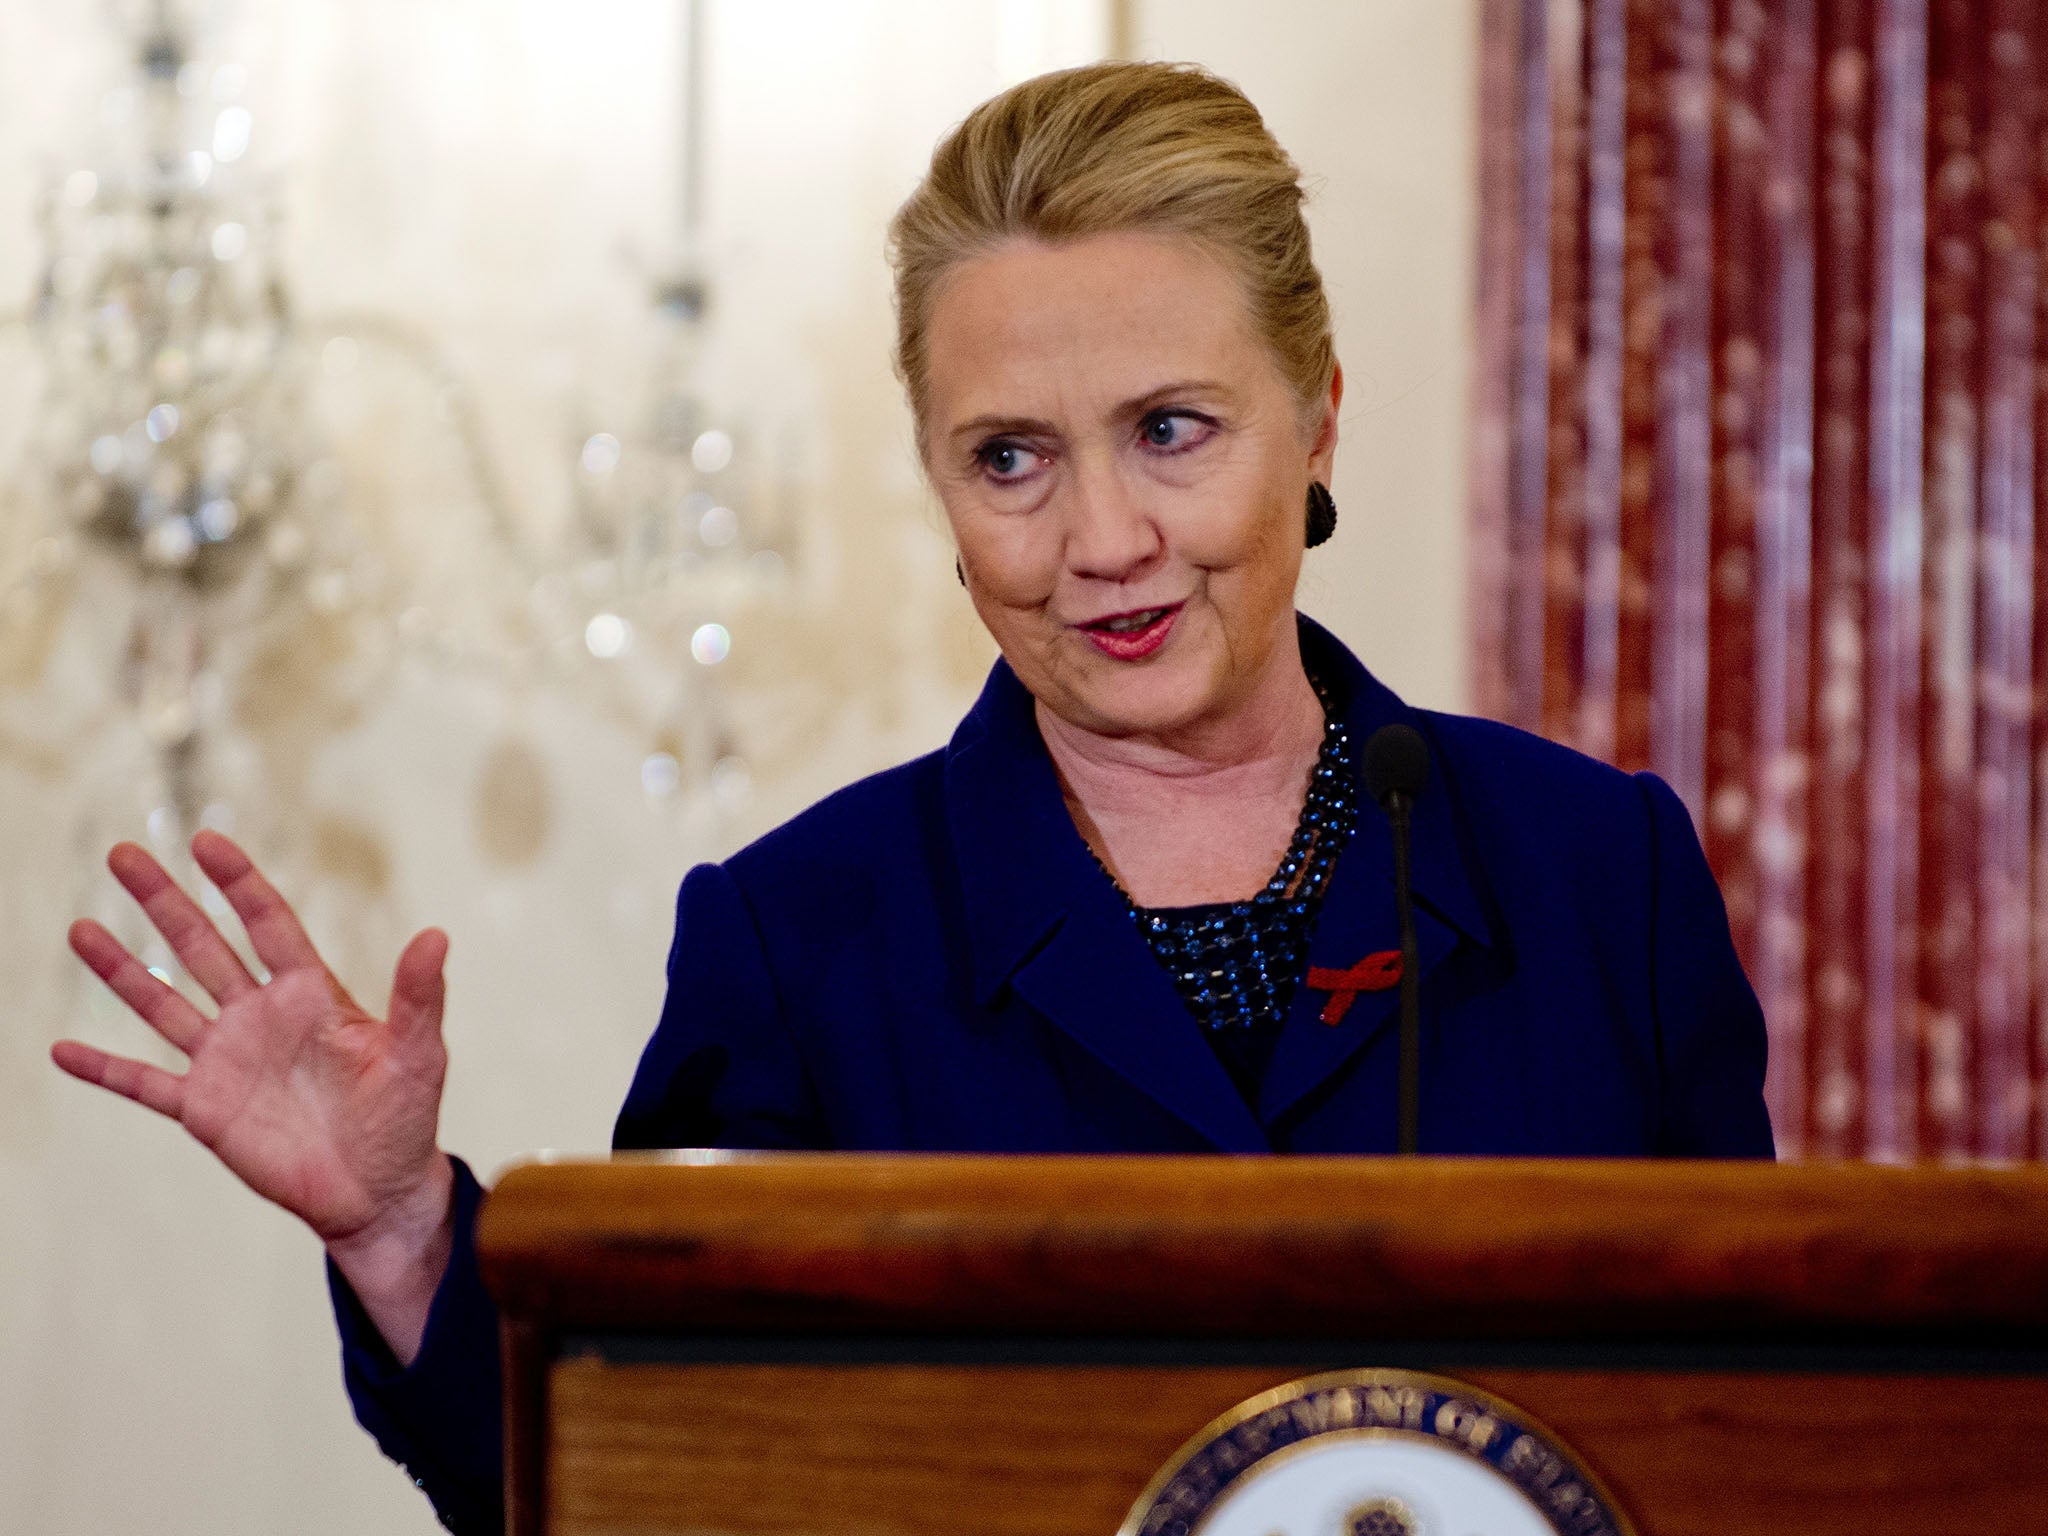 Hillary Clinton is visiting Stormont